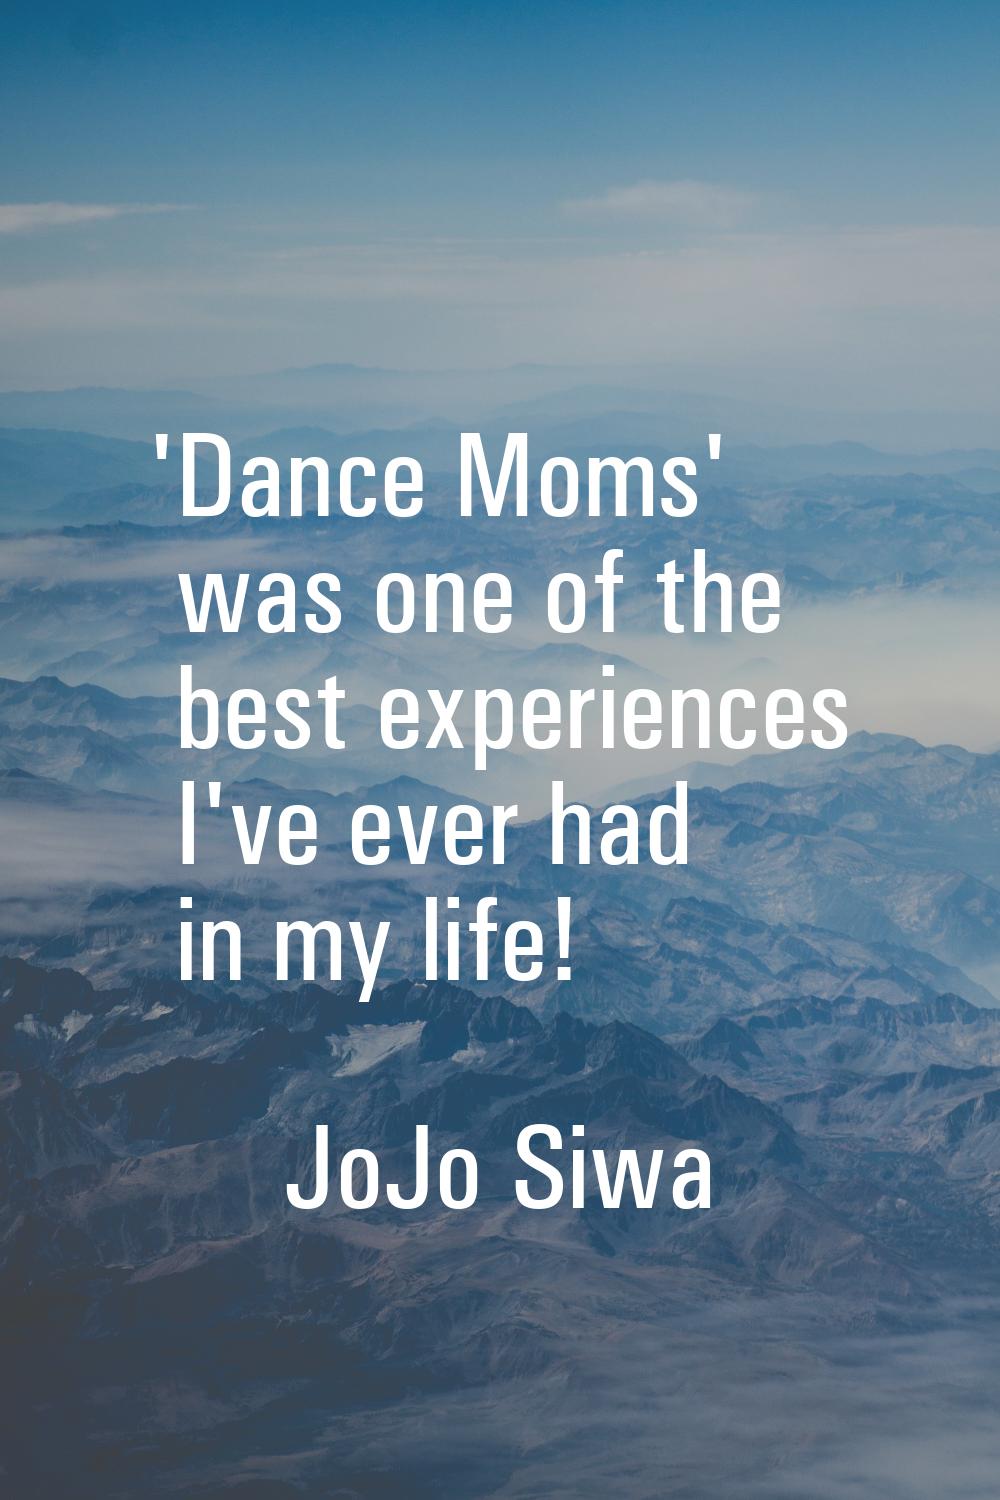 'Dance Moms' was one of the best experiences I've ever had in my life!